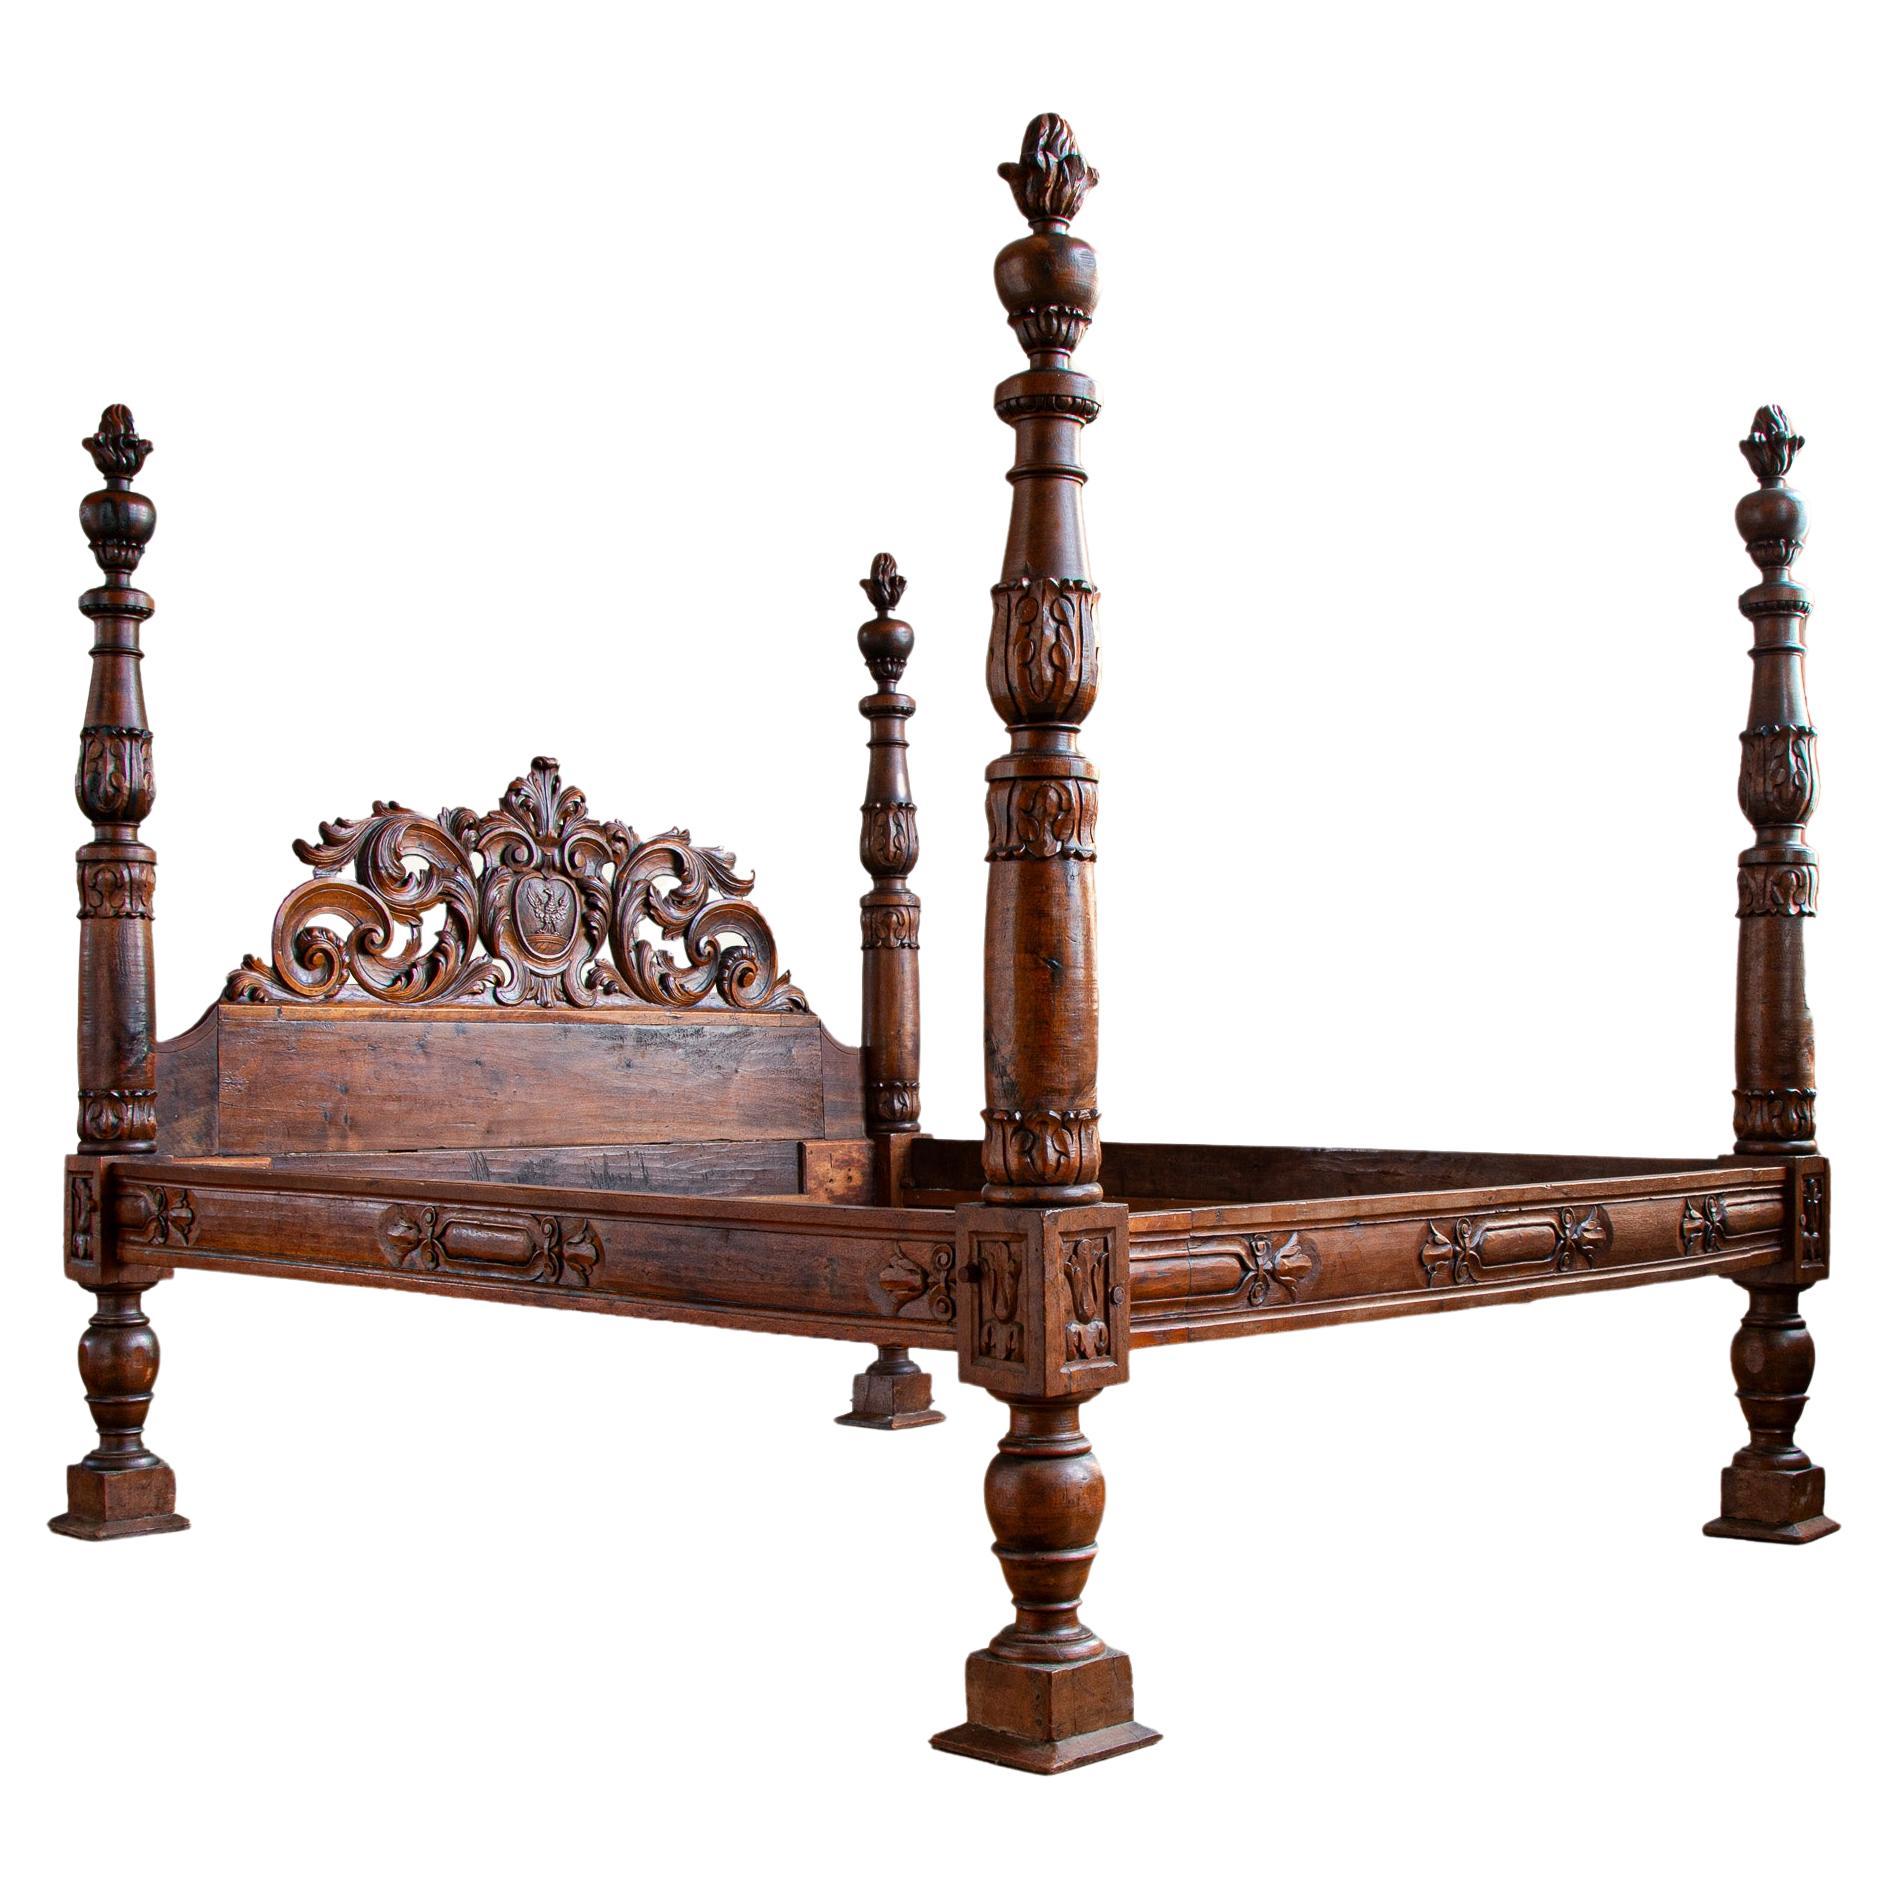 Circa Mid 1800's Italian Baroque Style Four Poster Bed In Carved Walnut For Sale